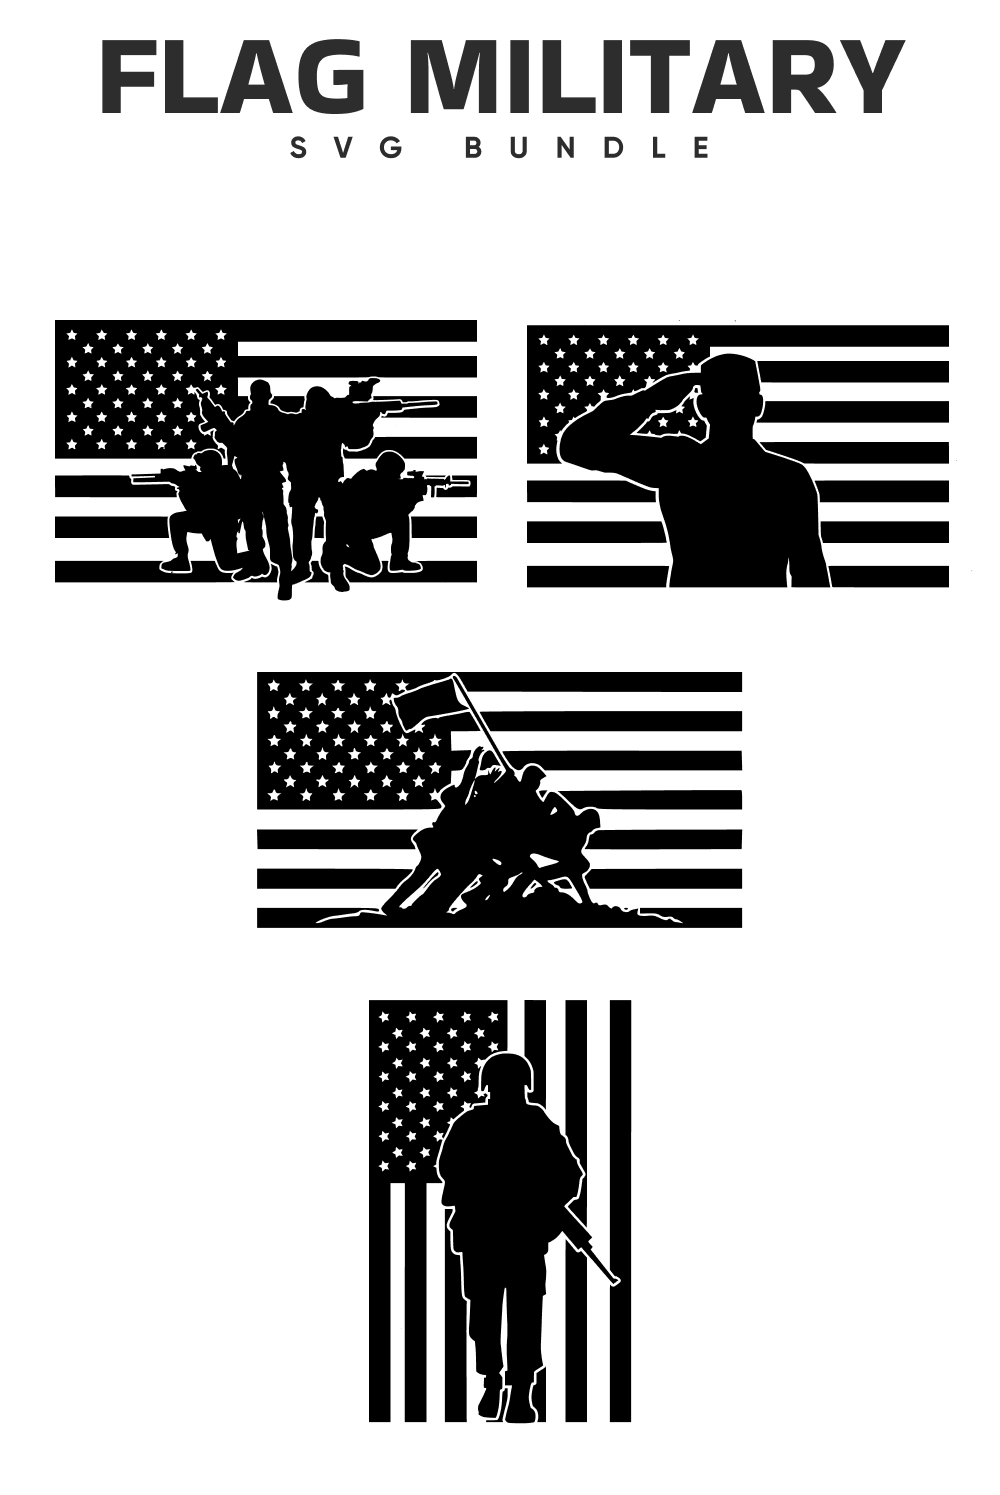 Military silhouettes on the background of the American flag.